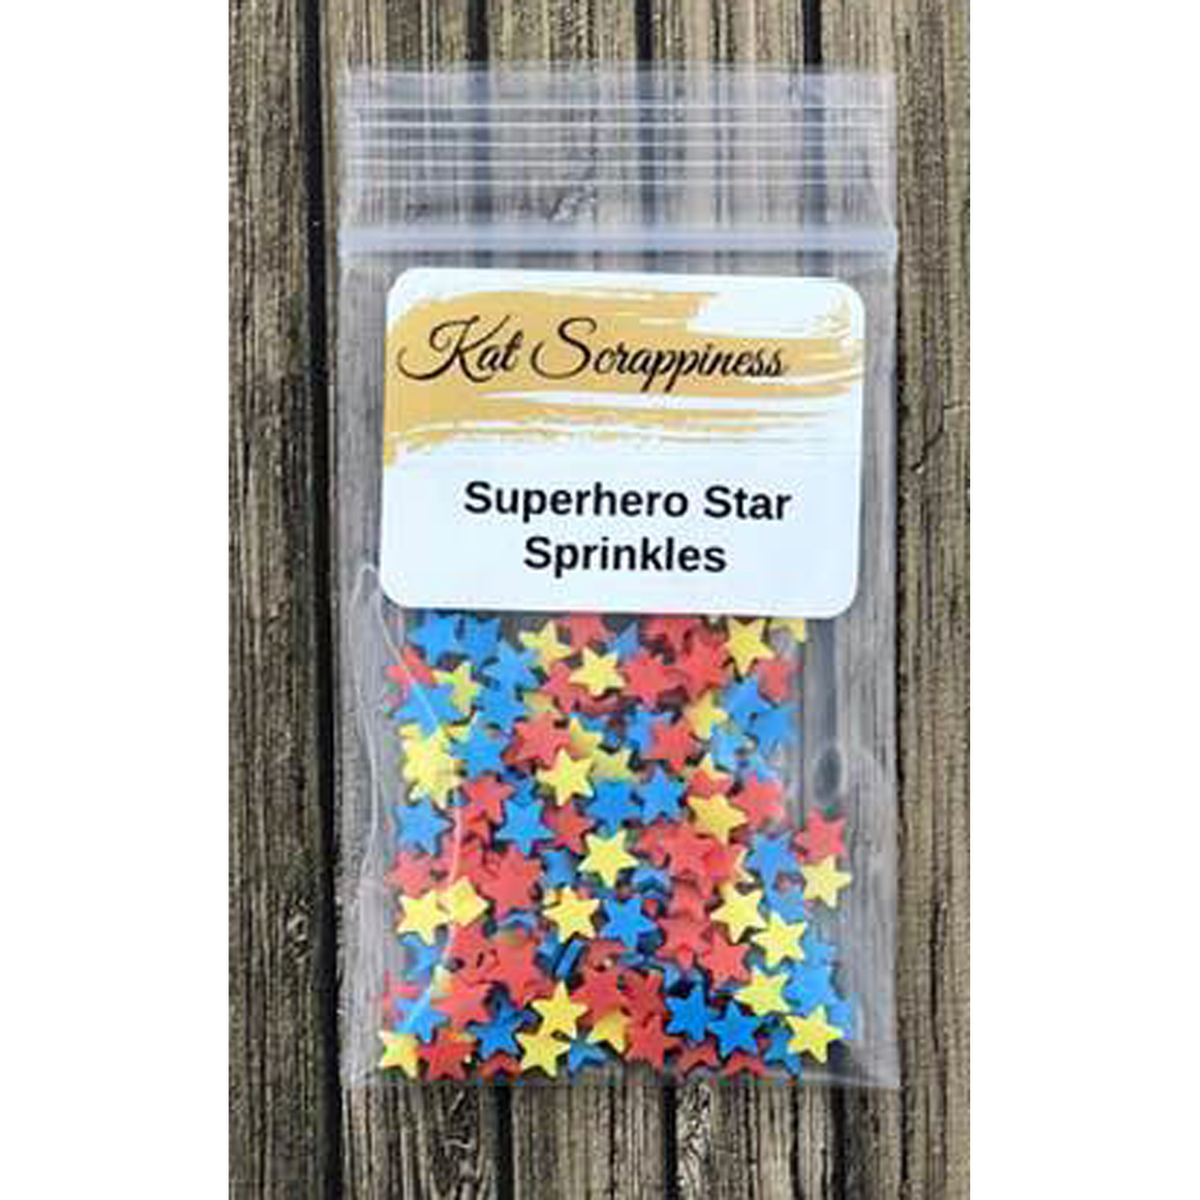 Superhero Star Sprinkles by Kat Scrappiness - Kat Scrappiness